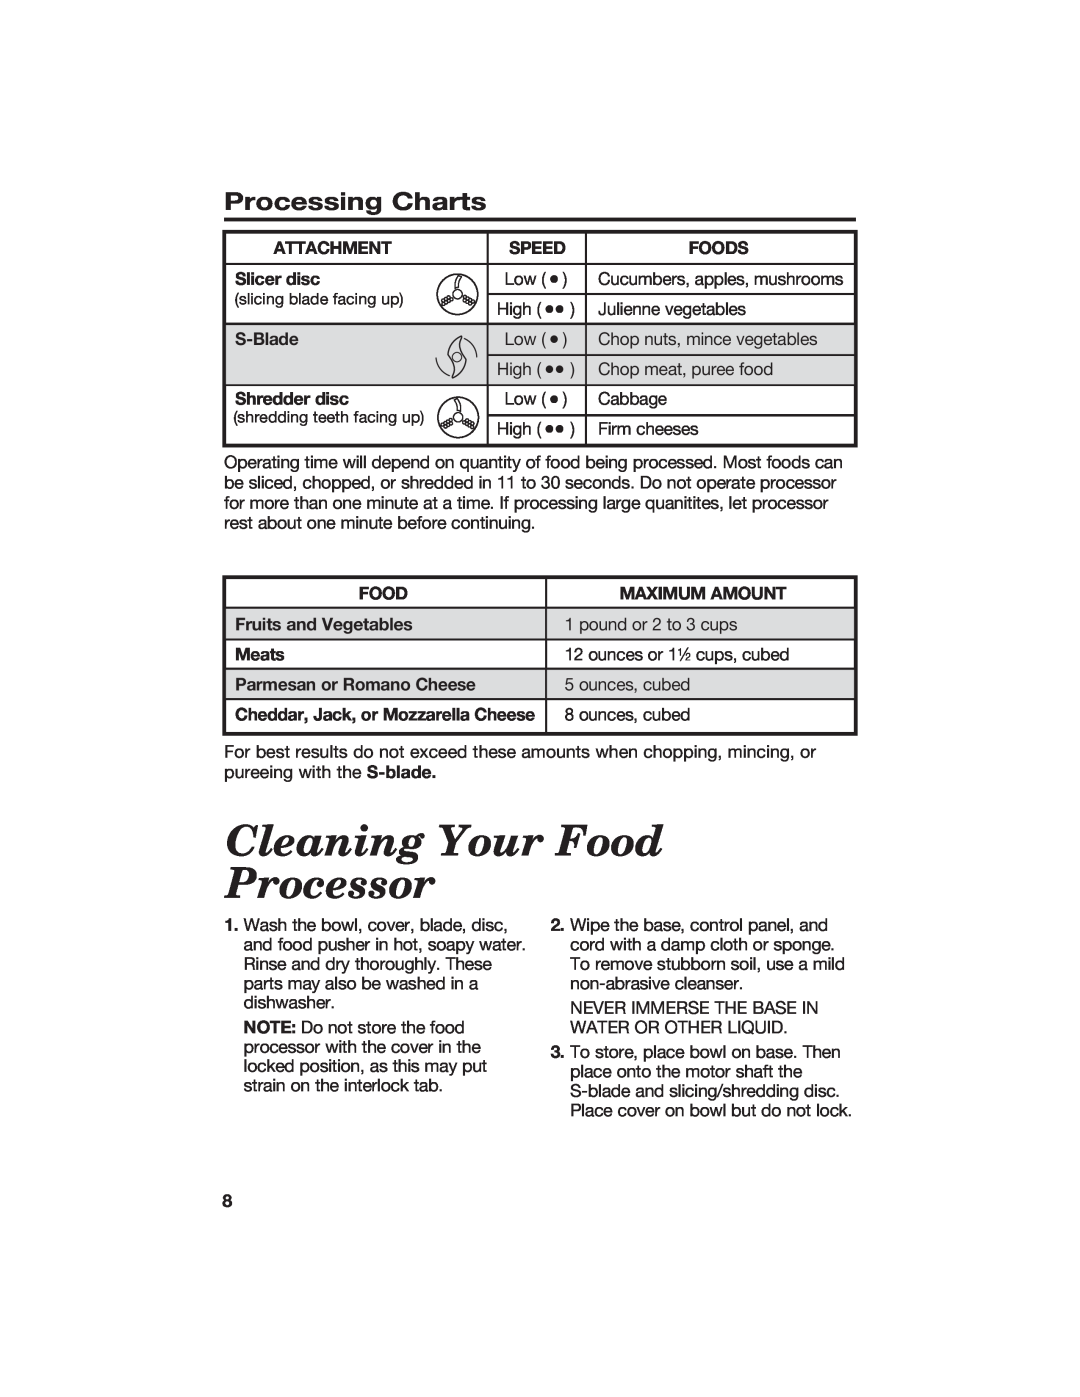 Hamilton Beach 840067300 manual Cleaning Your Food Processor, Processing Charts 